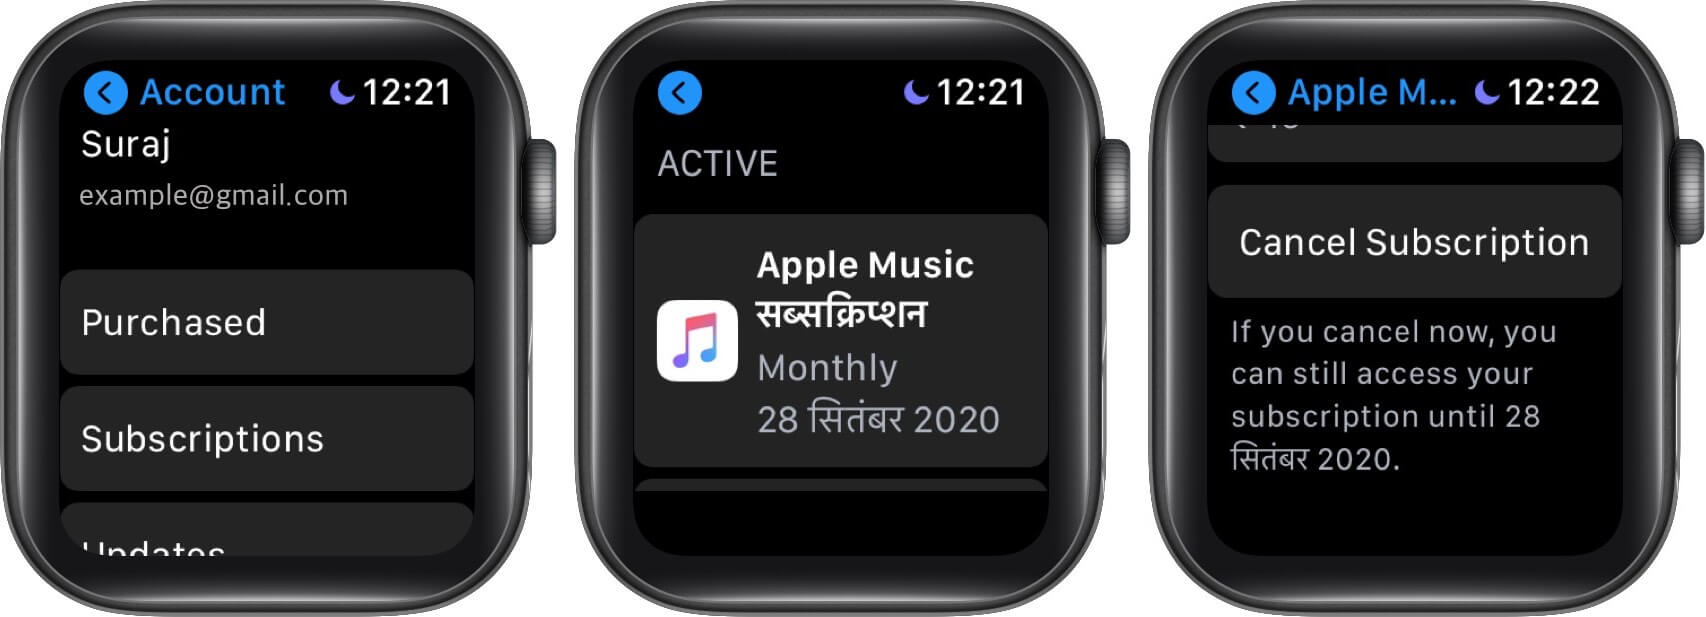 tap on subsctiption select apple music and tap on cancel subscription on apple watch